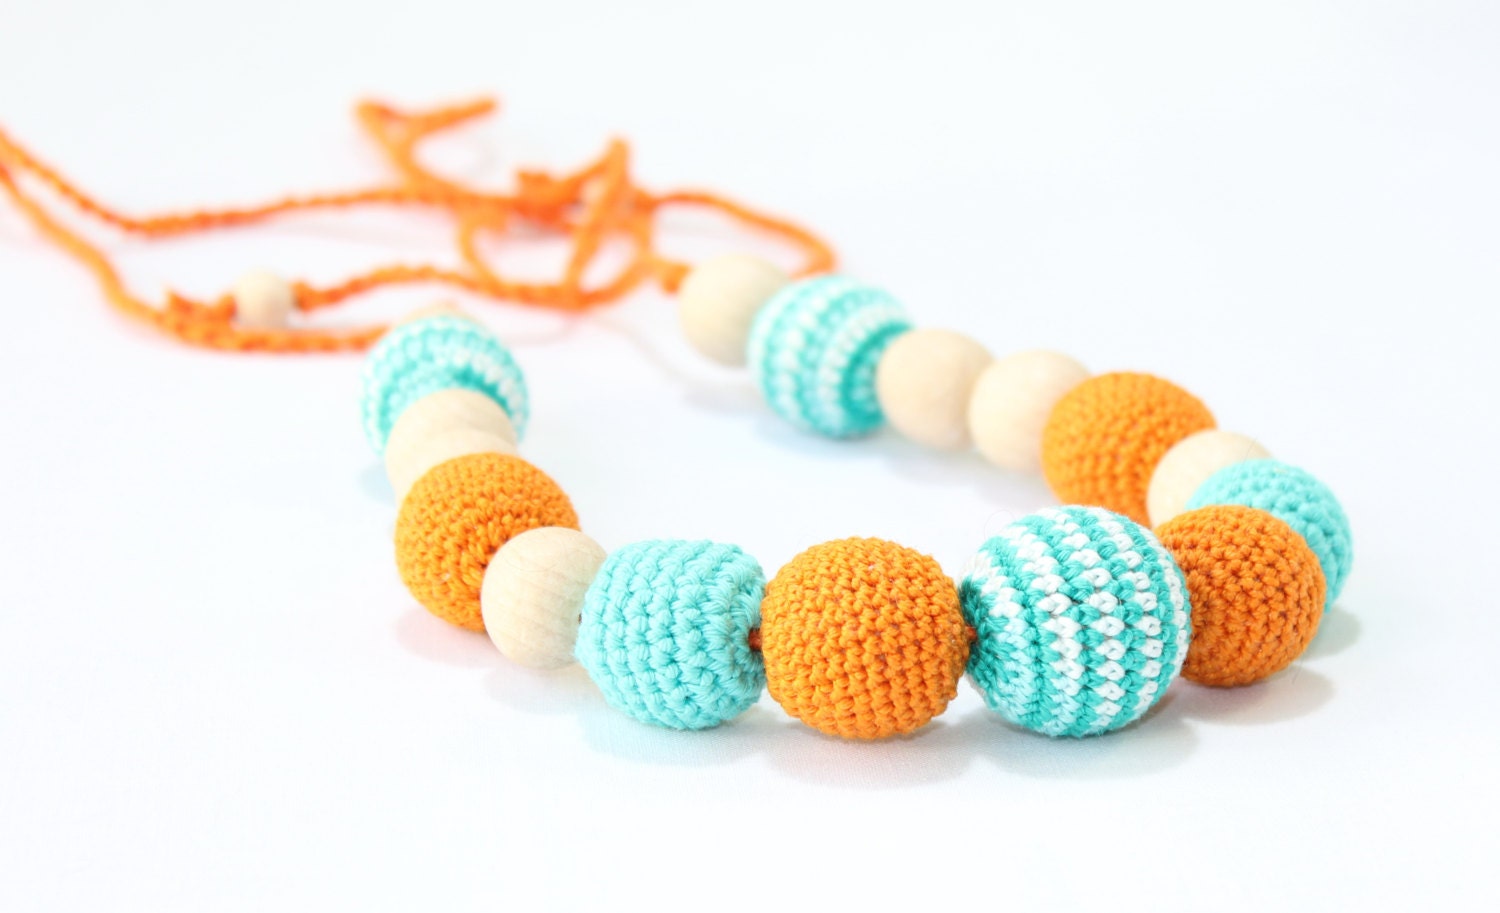 Nursing necklace / Teething necklace / Crochet Necklace for mom and child / Breastfeeding Jewelry for Mom / Crochet sling necklace - TanyaforBaby